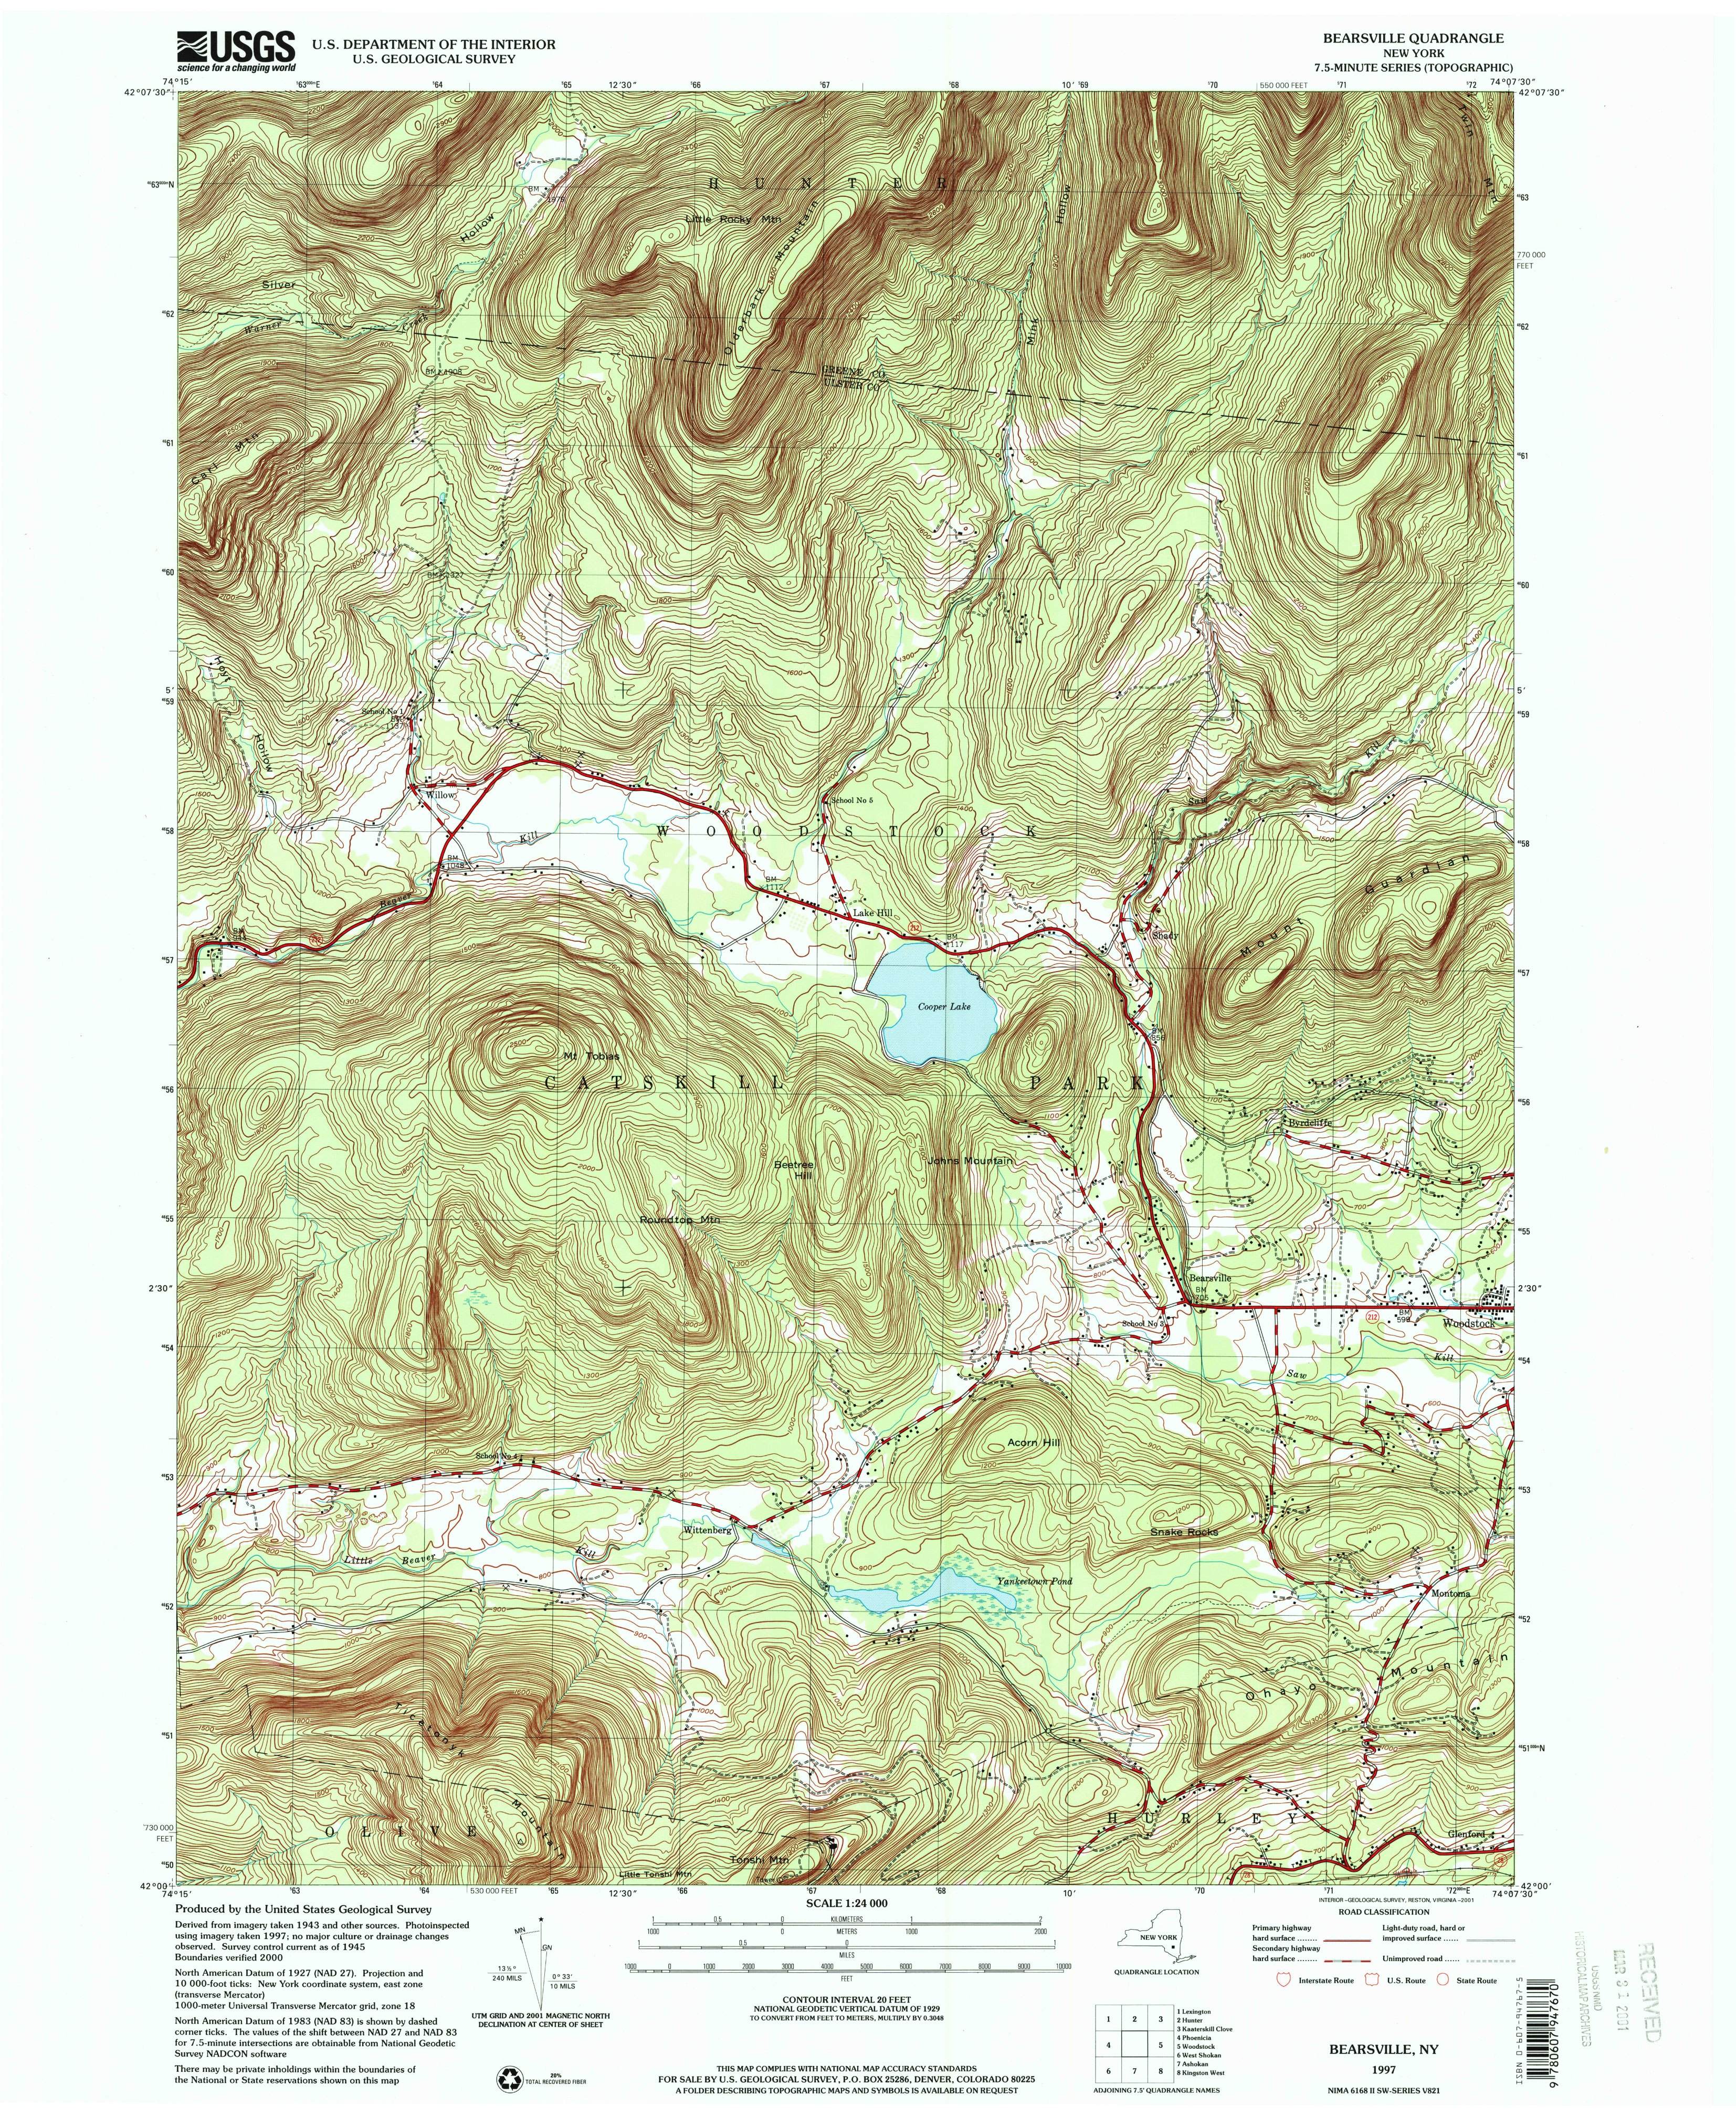 1997 USGS topographical map of Bearsville